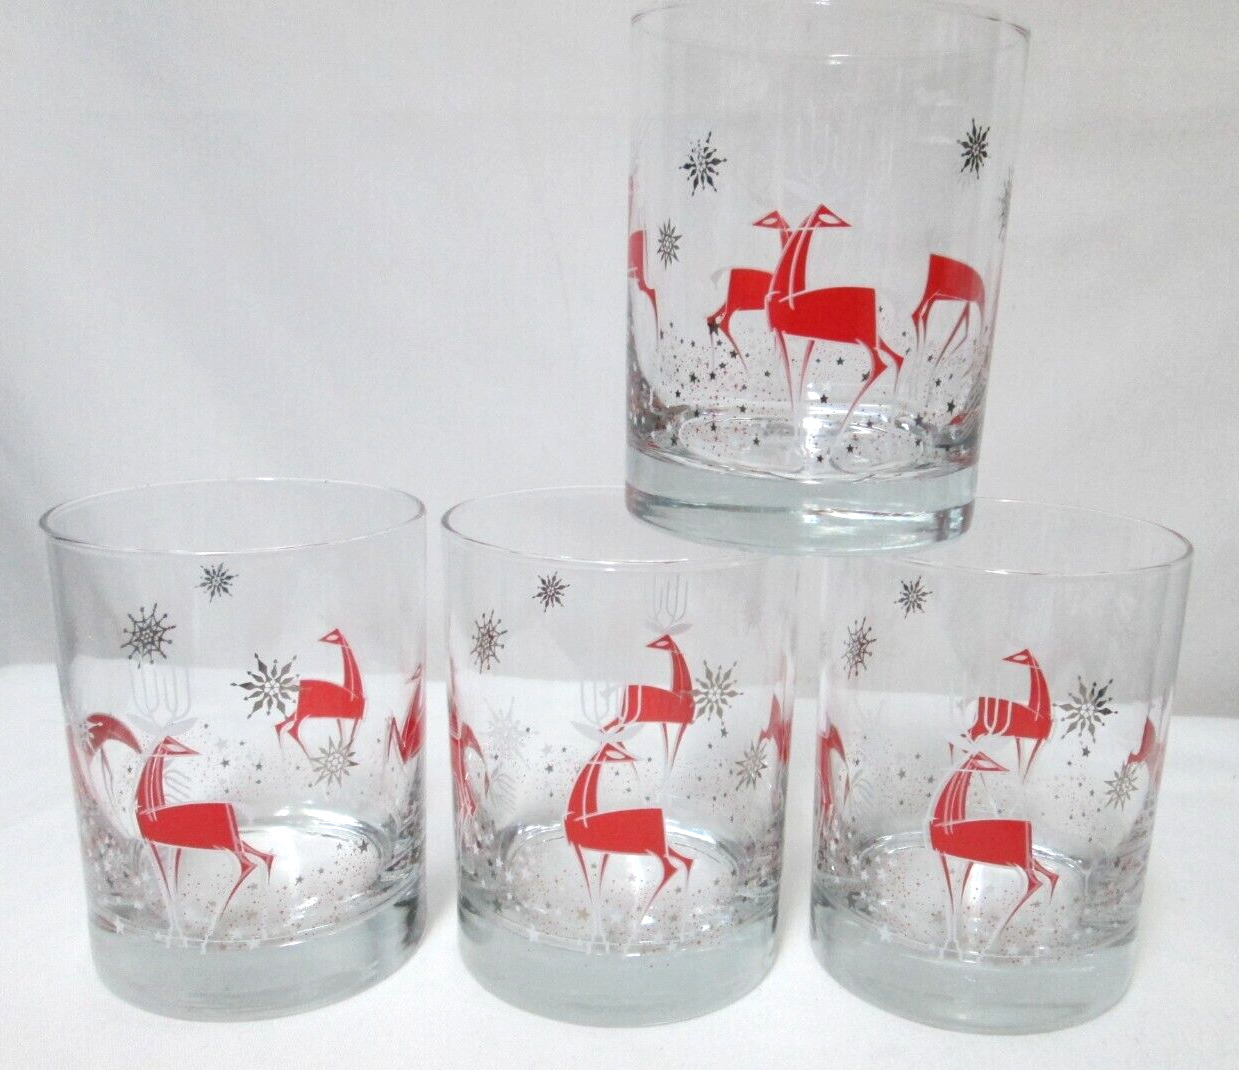 Christmas Reindeer snowflakes Set 4 glass old fashioned tumblers red white